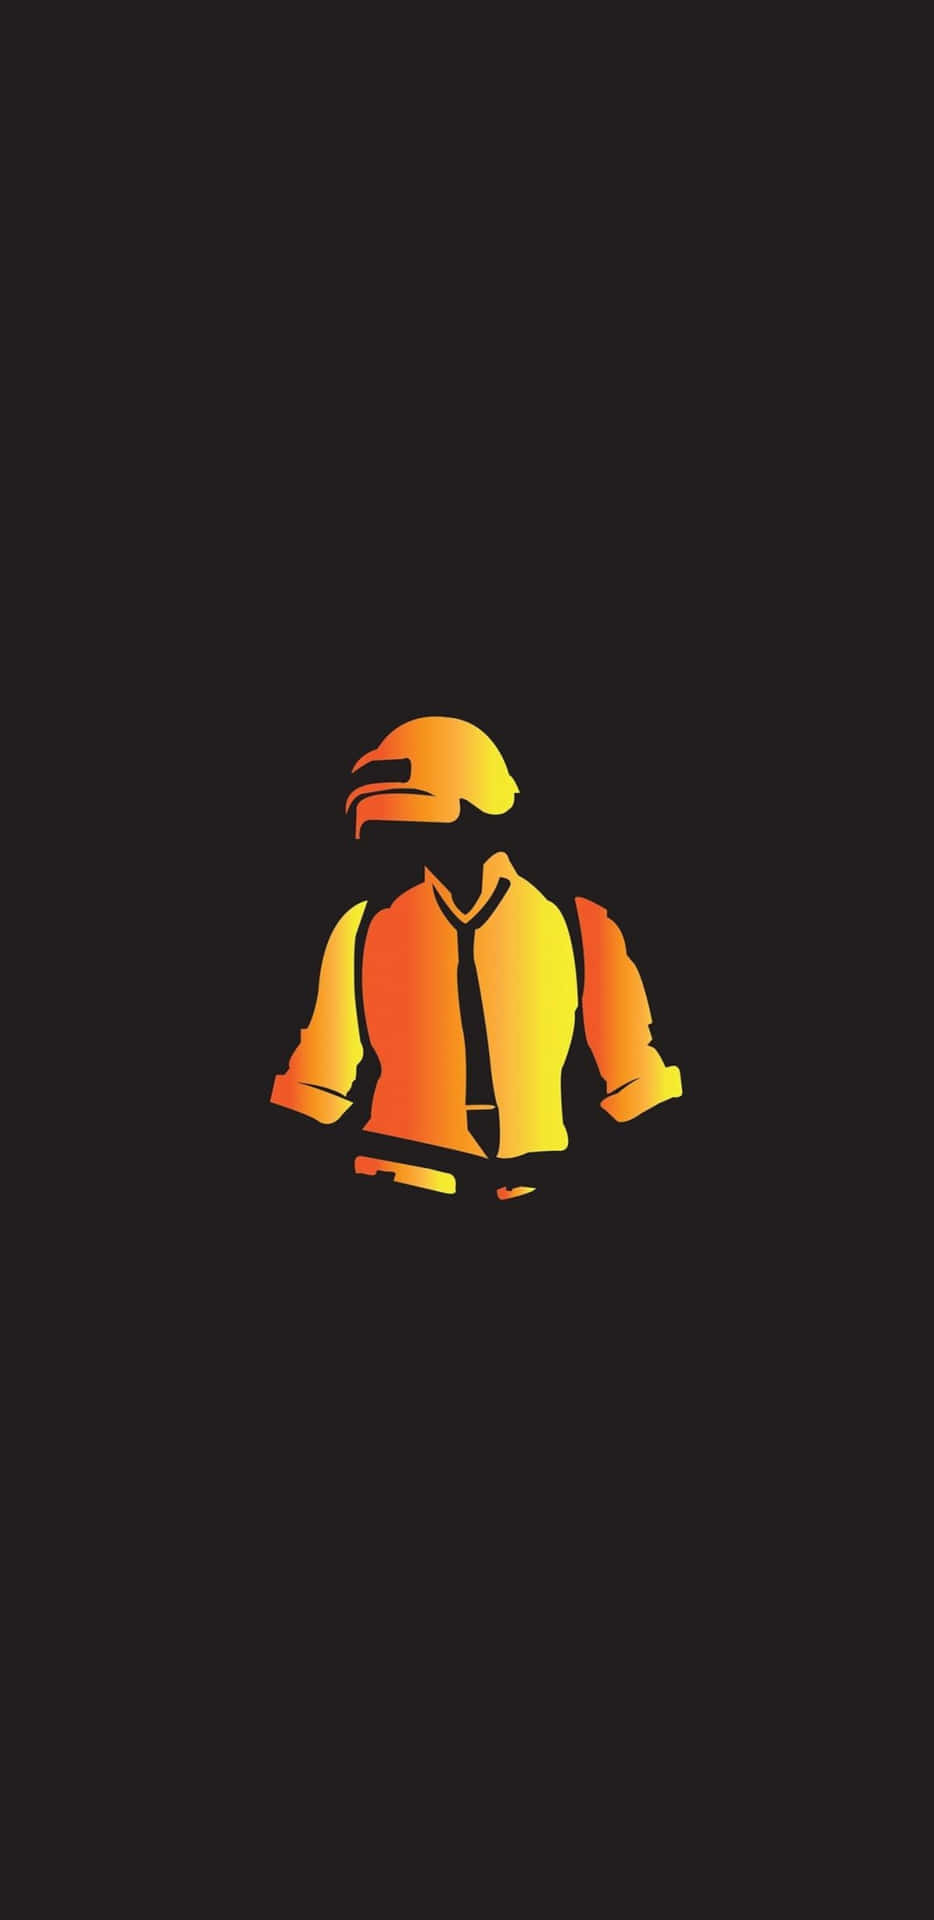 Pixel 3xl Playerunknown's Battlegrounds Background Silhouette Of A Guy In Orange